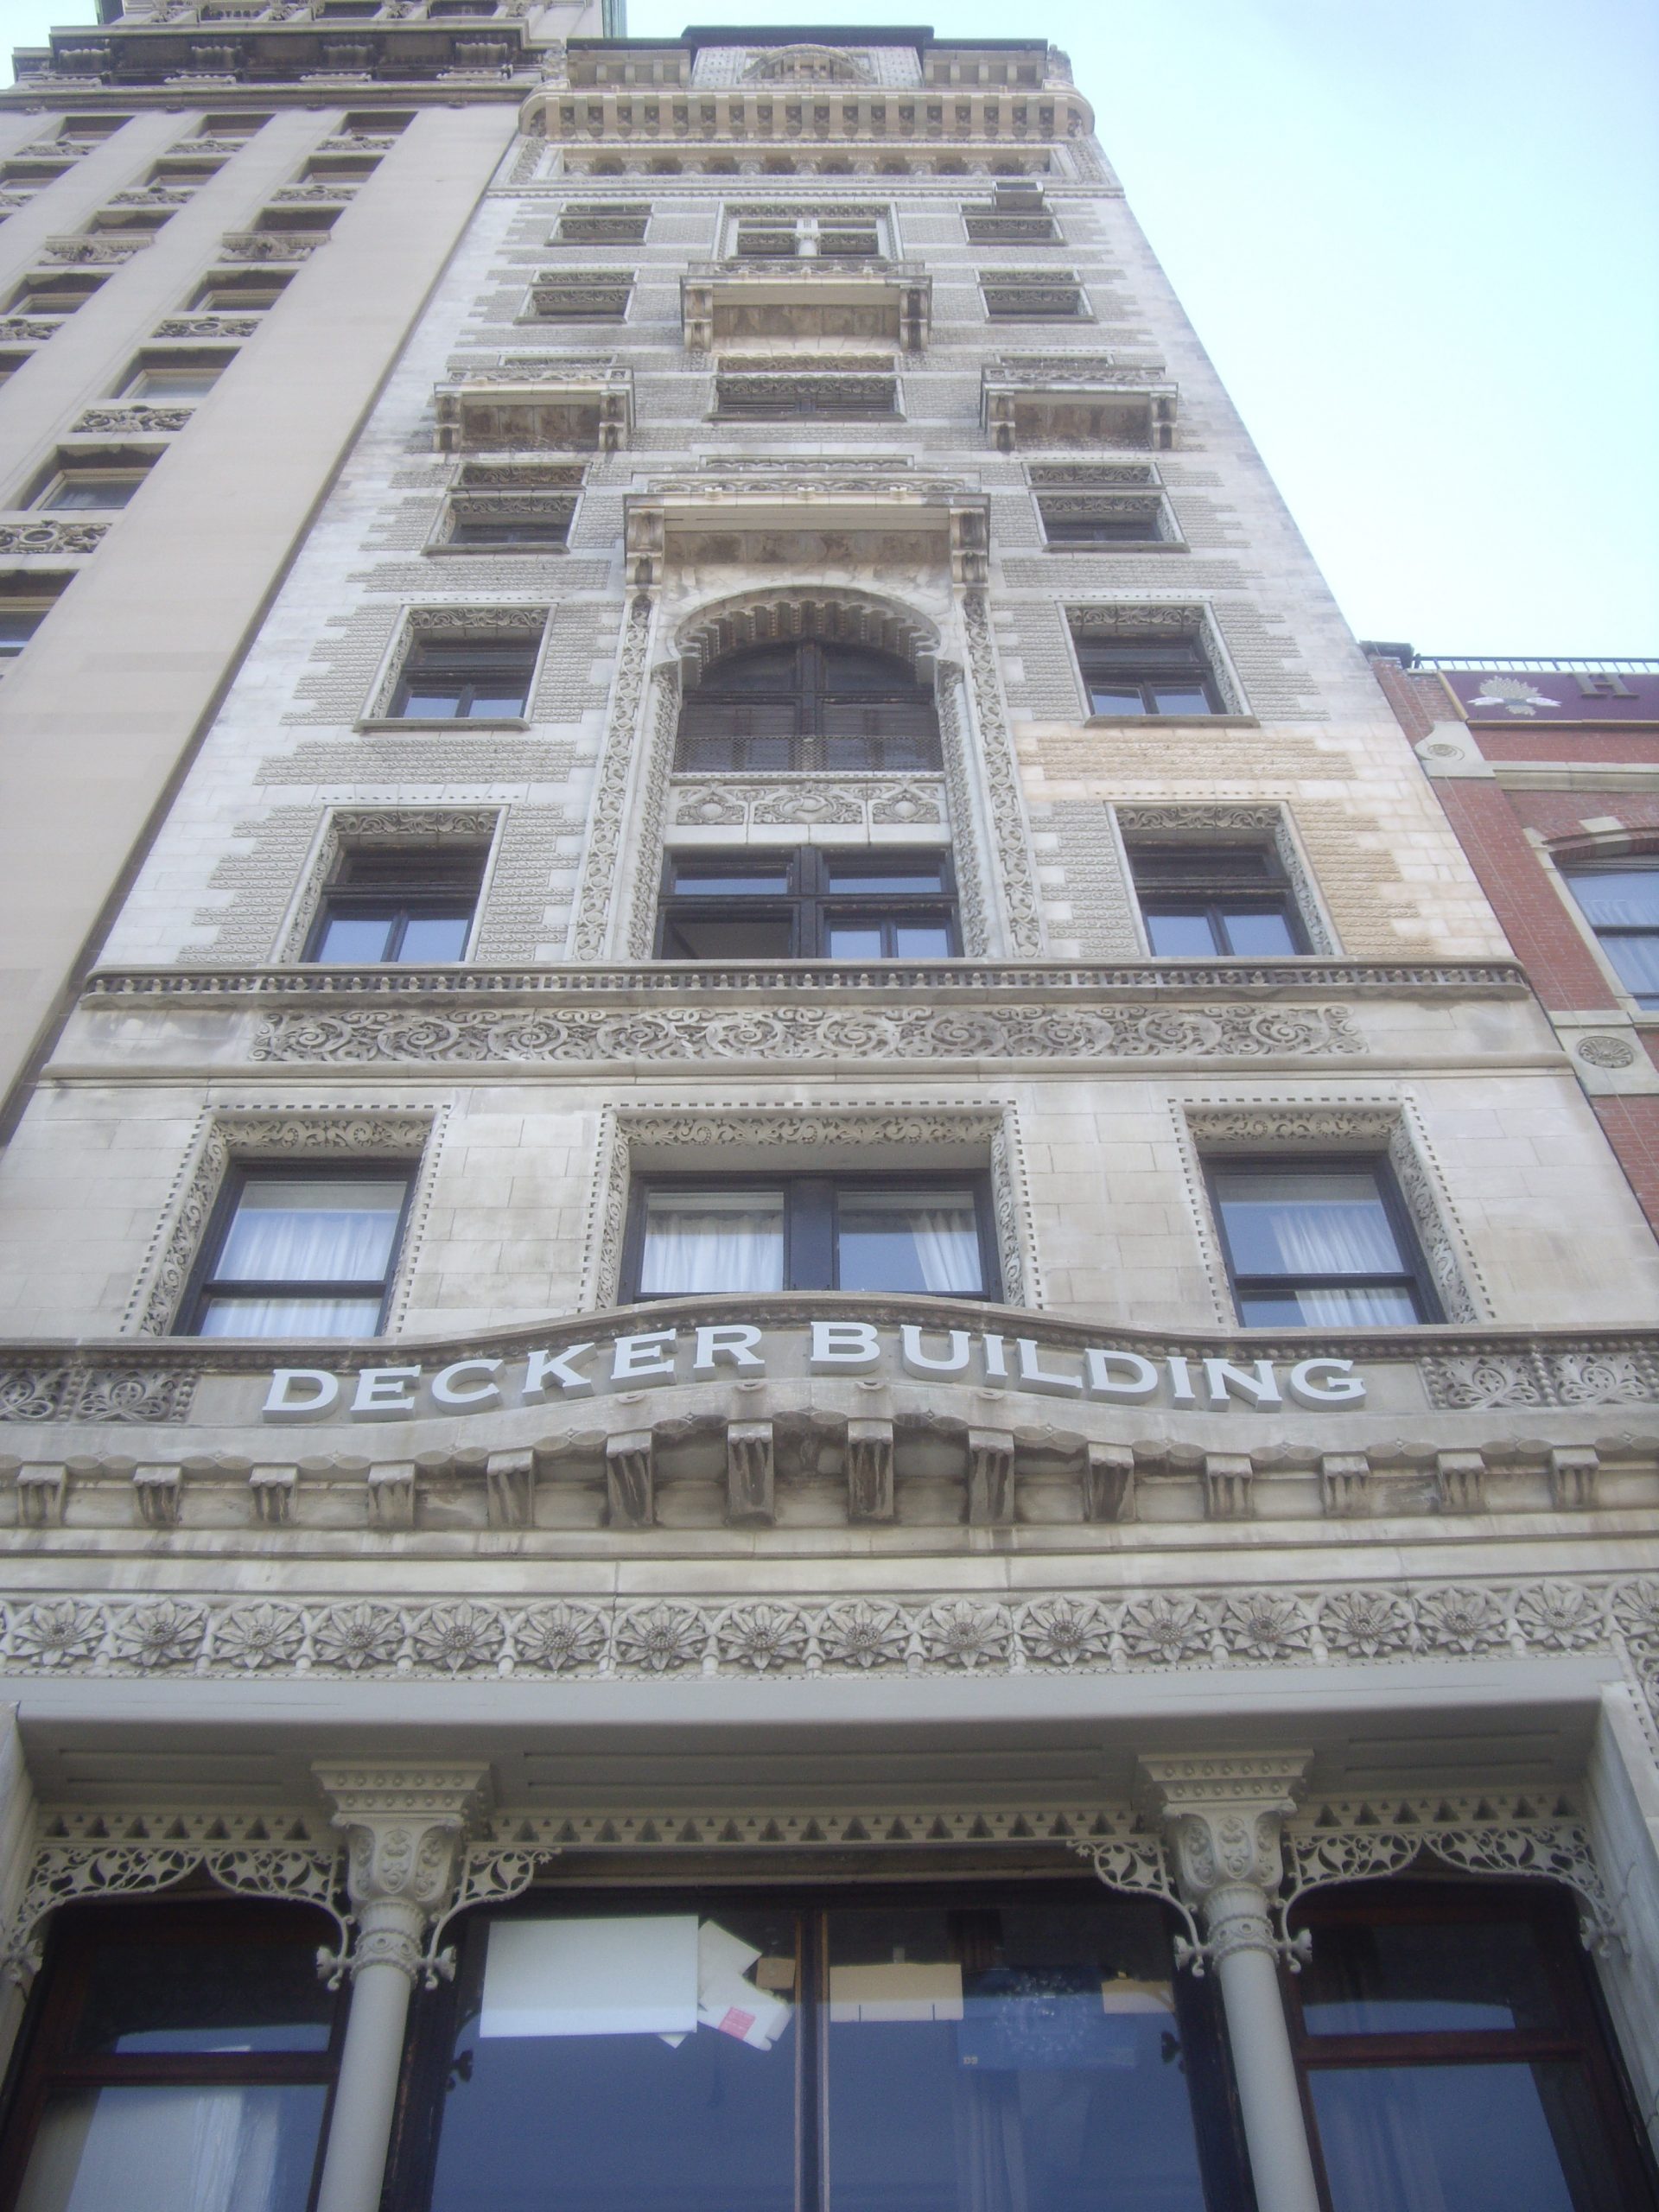 Decker Building on 33 Union Square West, New York City